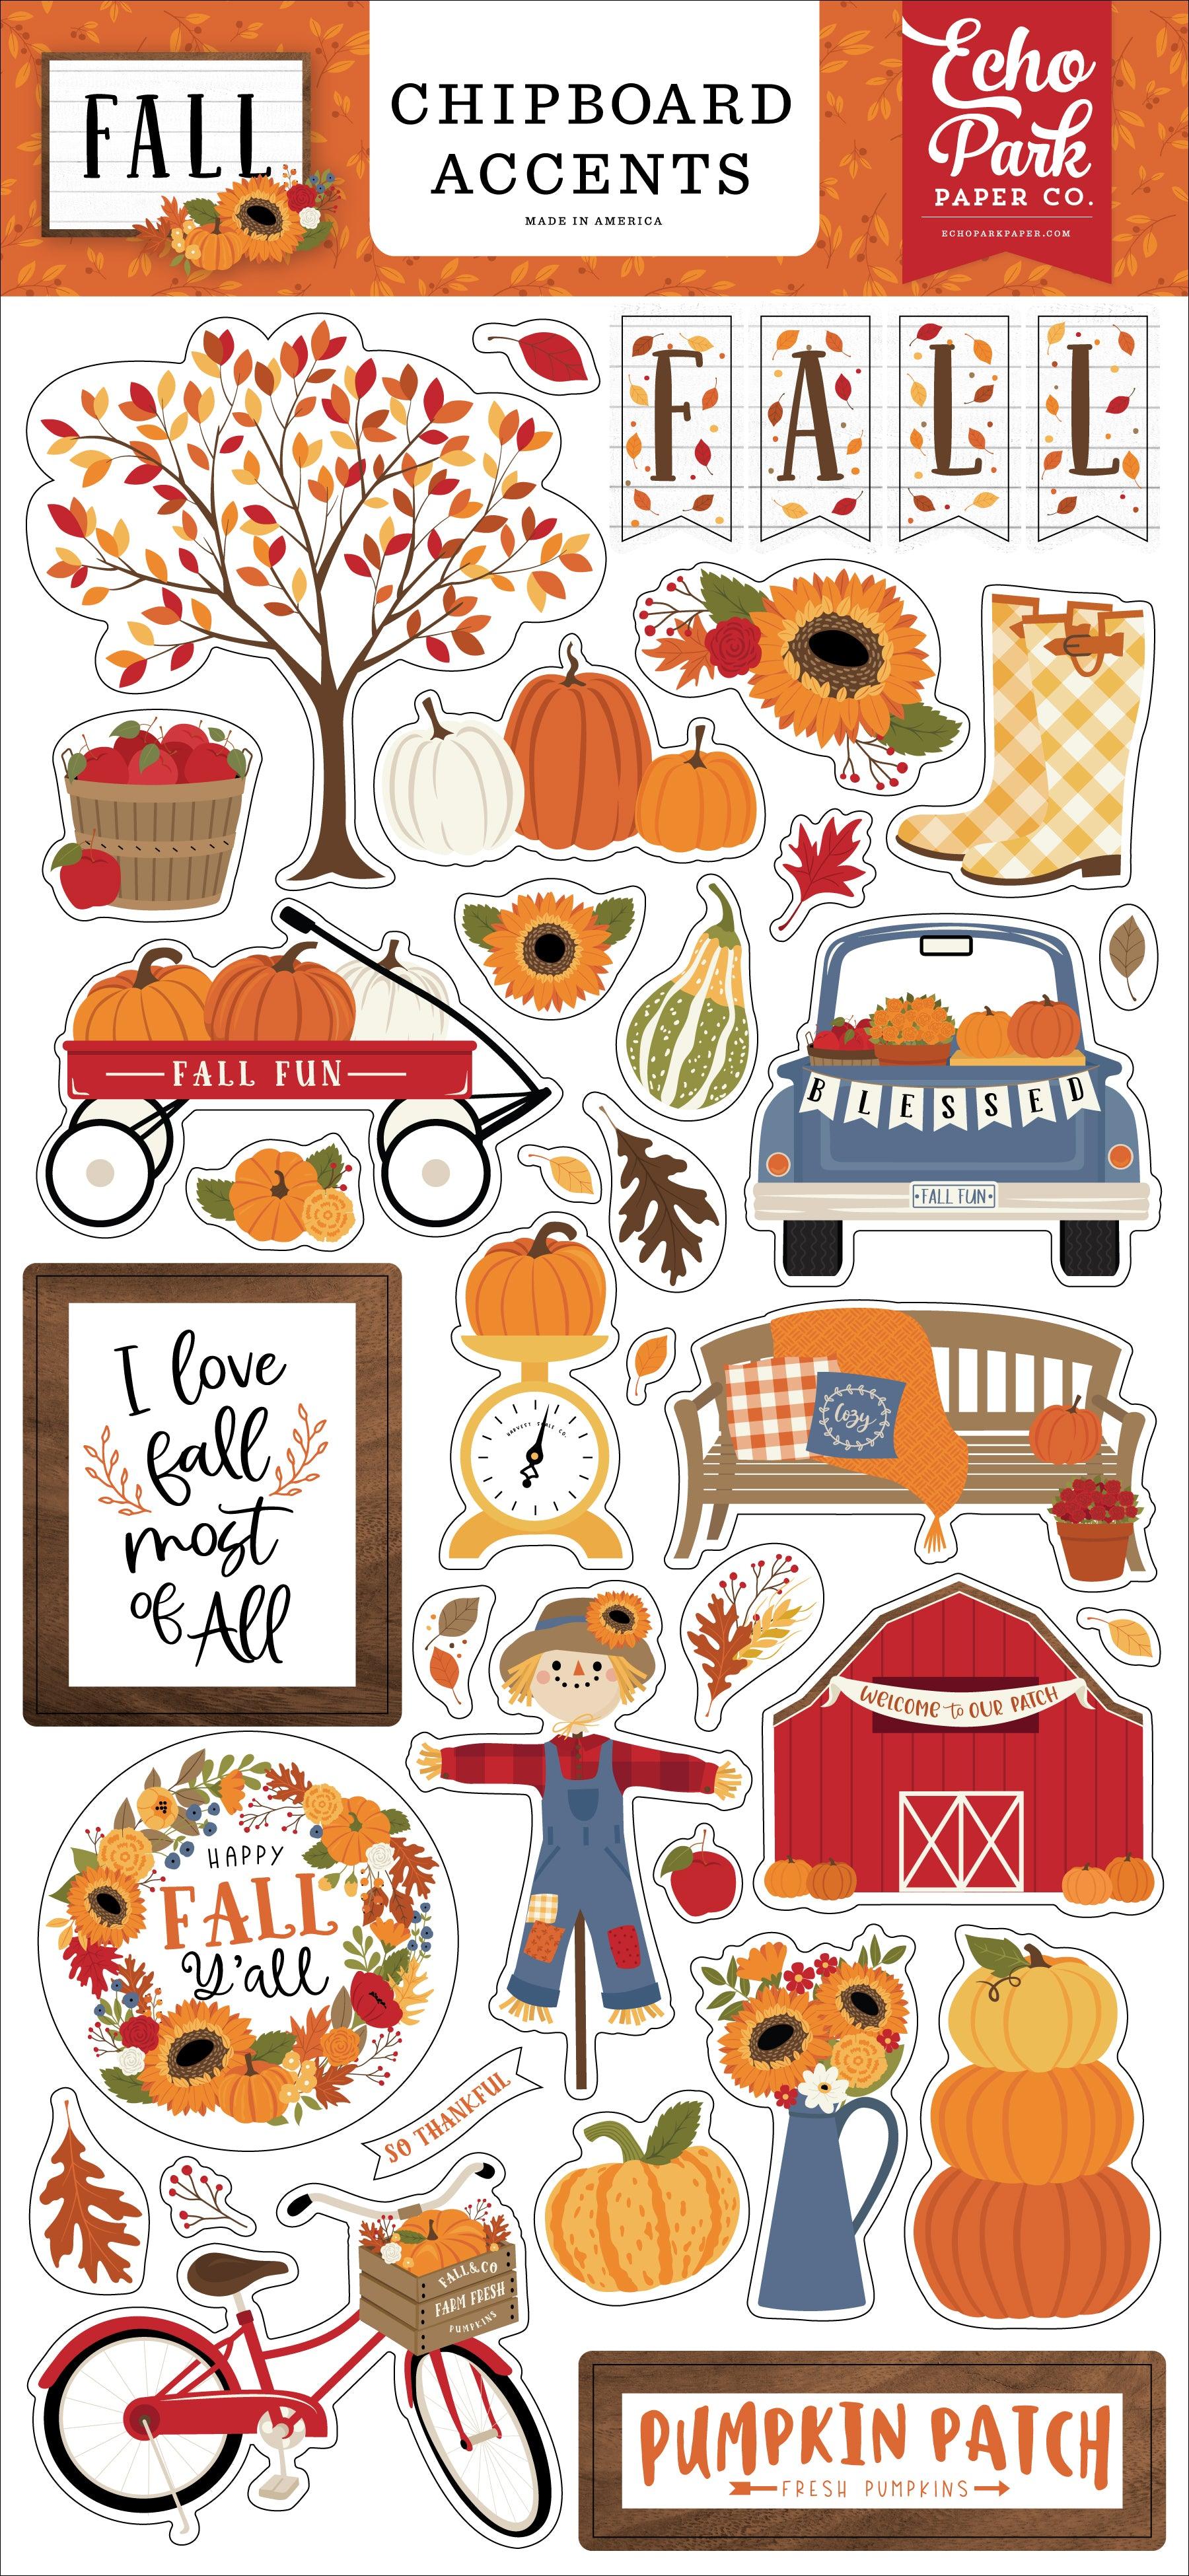 Fall Collection 6 x 12 Scrapbook Chipboard Accents by Echo Park Paper - Scrapbook Supply Companies